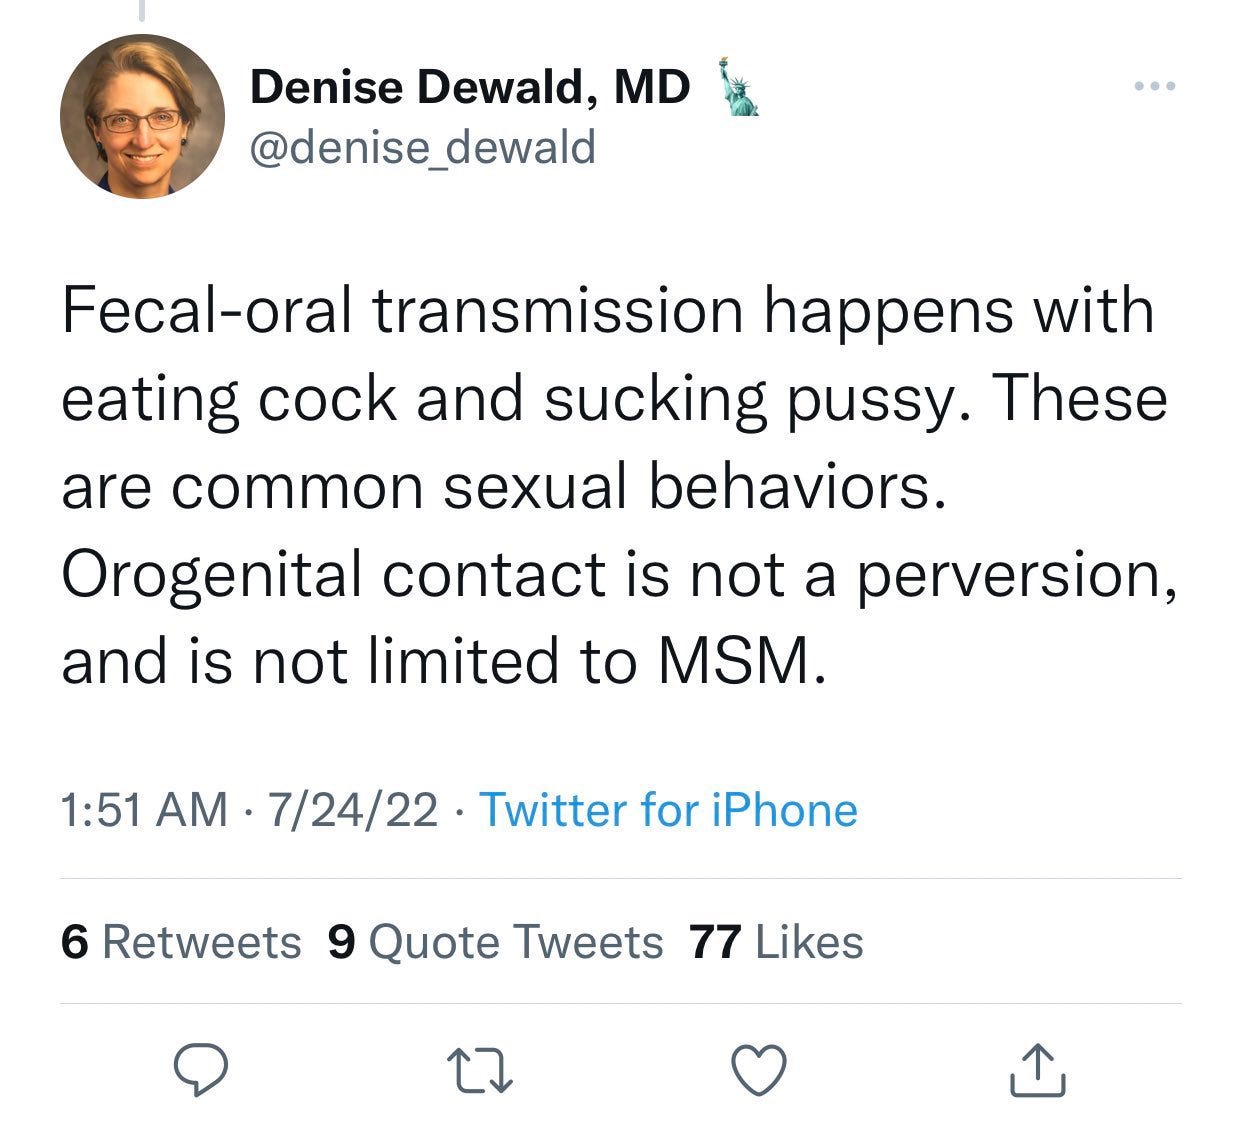 jaclyn on Twitter: "feeling the urge to write an absolutely insufferable  paper nobody asked for called “Eating Cock and Sucking Pussy: Queering the  MedTwitter Discourse” https://t.co/GOtkKO7bVZ" / Twitter